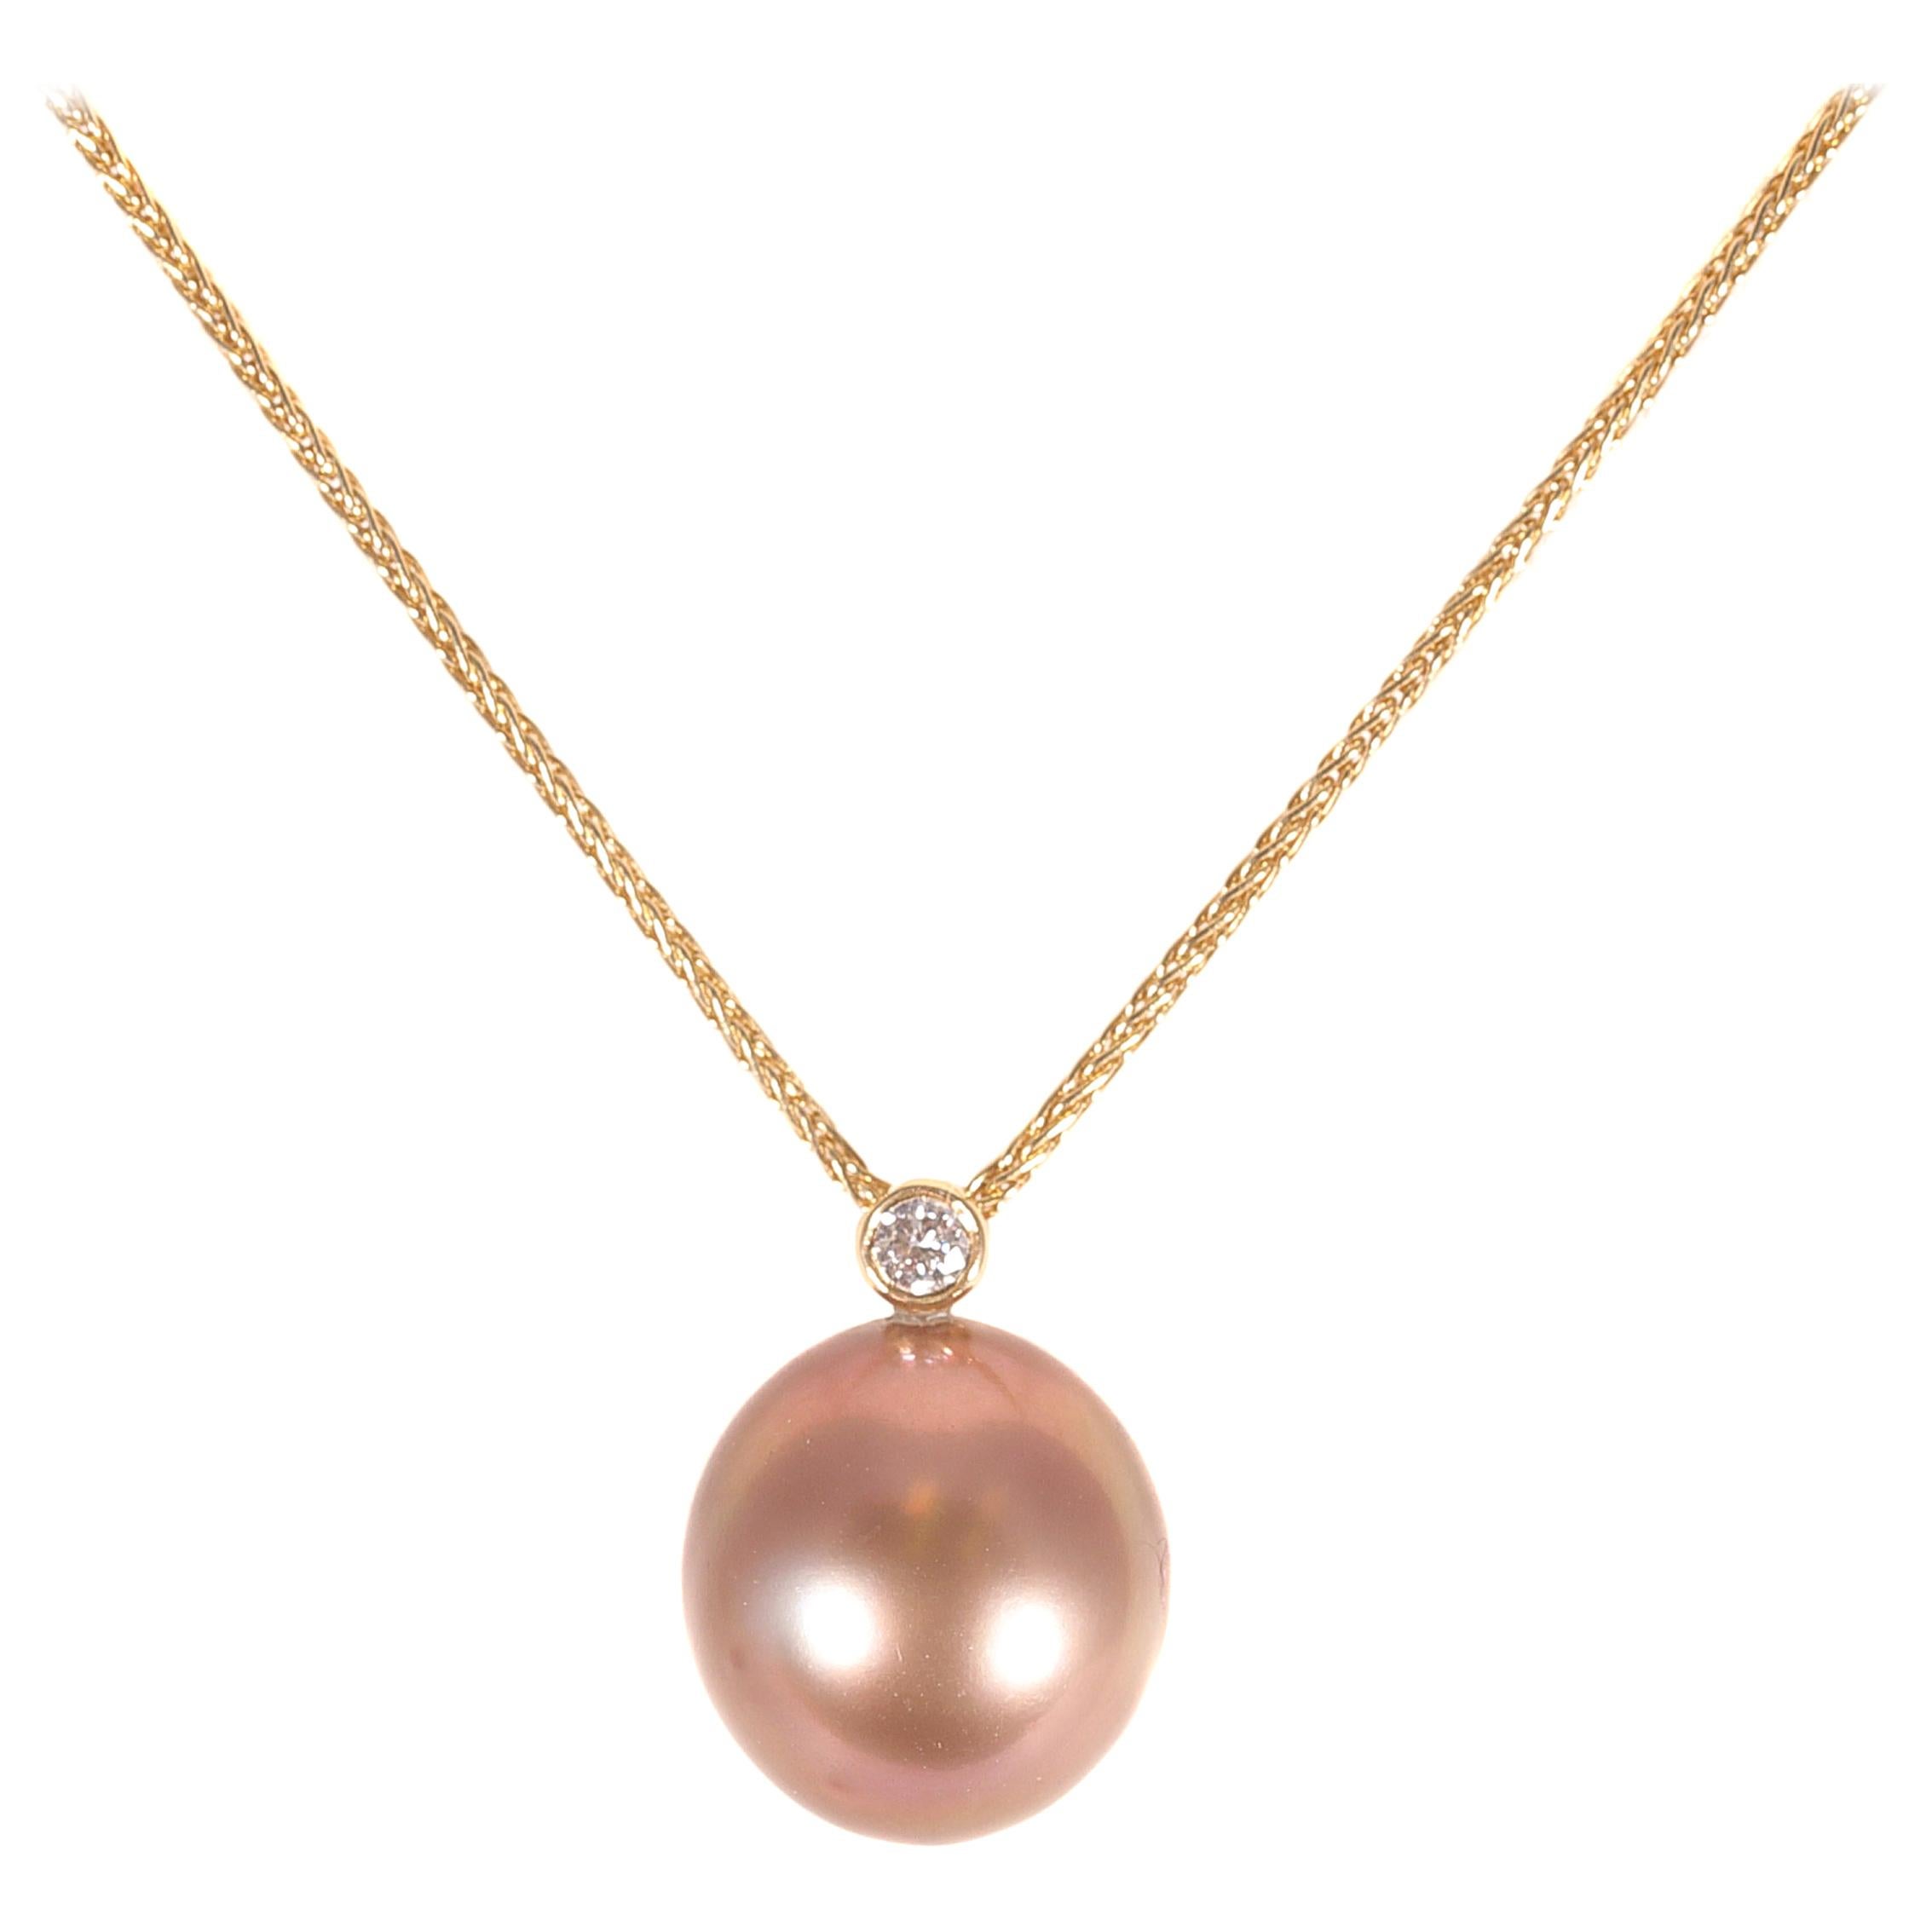 18 Karat Yellow Gold Pearl and Diamond Necklace